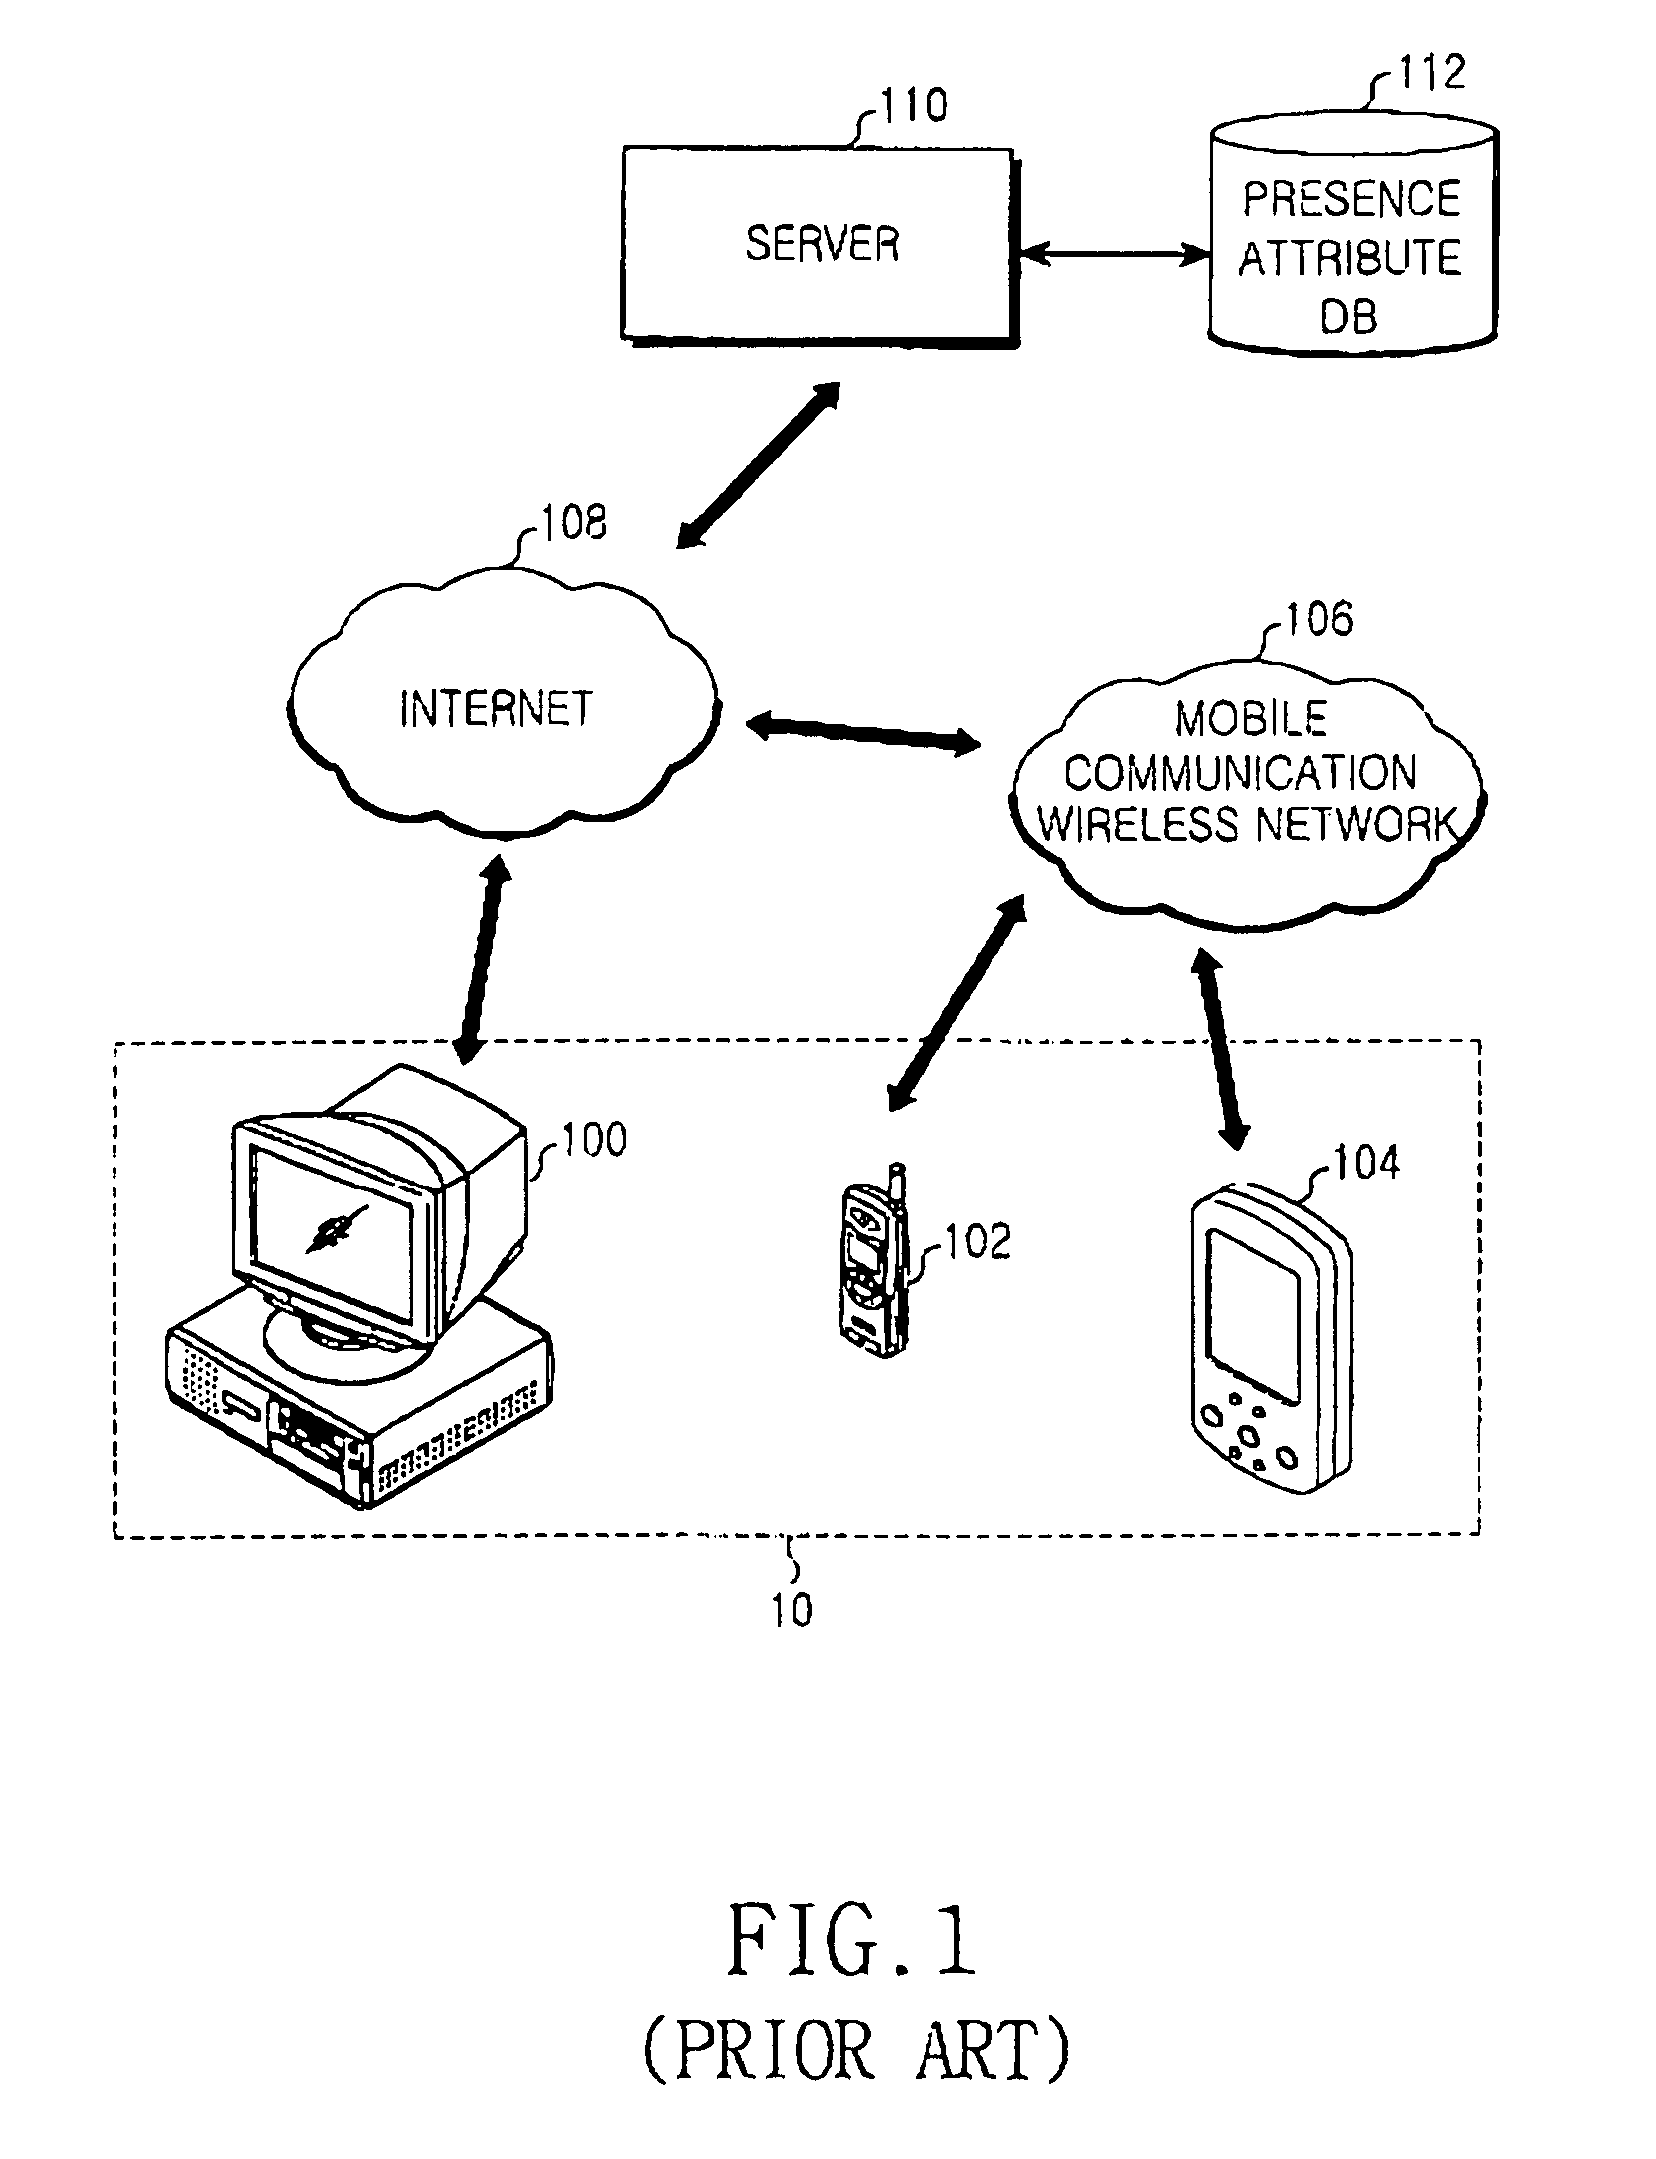 Apparatus and method for synchronizing presence attribute data between terminal and server